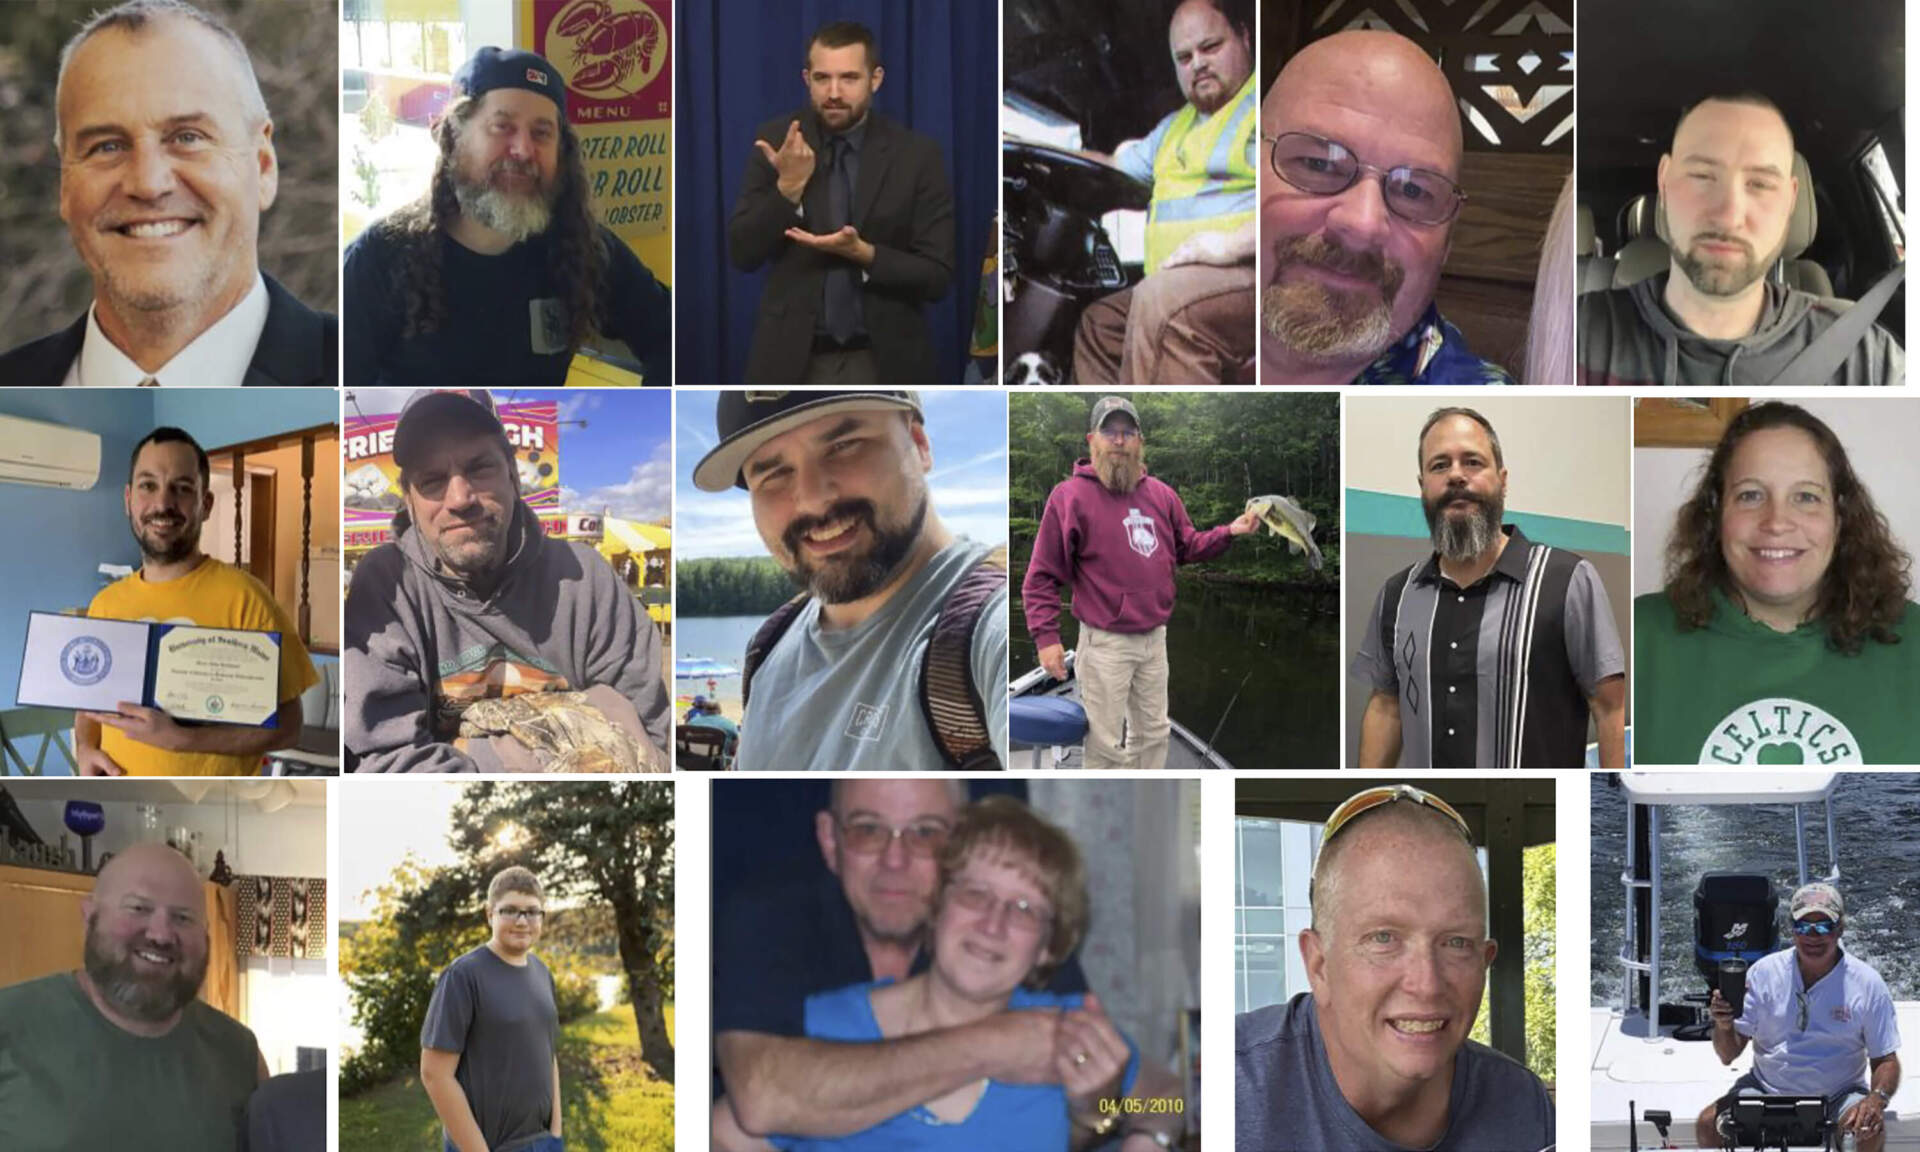 Victims of the Maine shooting. Top from left, Ronald G. Morin, Peyton Brewer-Ross, Joshua A. Seal, Bryan M. MacFarlane, Joseph Lawrence Walker, Arthur Fred Strout. Second row from left, Maxx A. Hathaway, Stephen M. Vozzella, Thomas Ryan Conrad, Michael R. Deslauiers II, Jason Adam, Tricia C. Asselin. Third Row from left, William A. Young, Aaron Young, Robert E. Violette and Lucille M. Violette, William Frank, Keith D. Macneir. (Maine Department of Public Safety via AP)